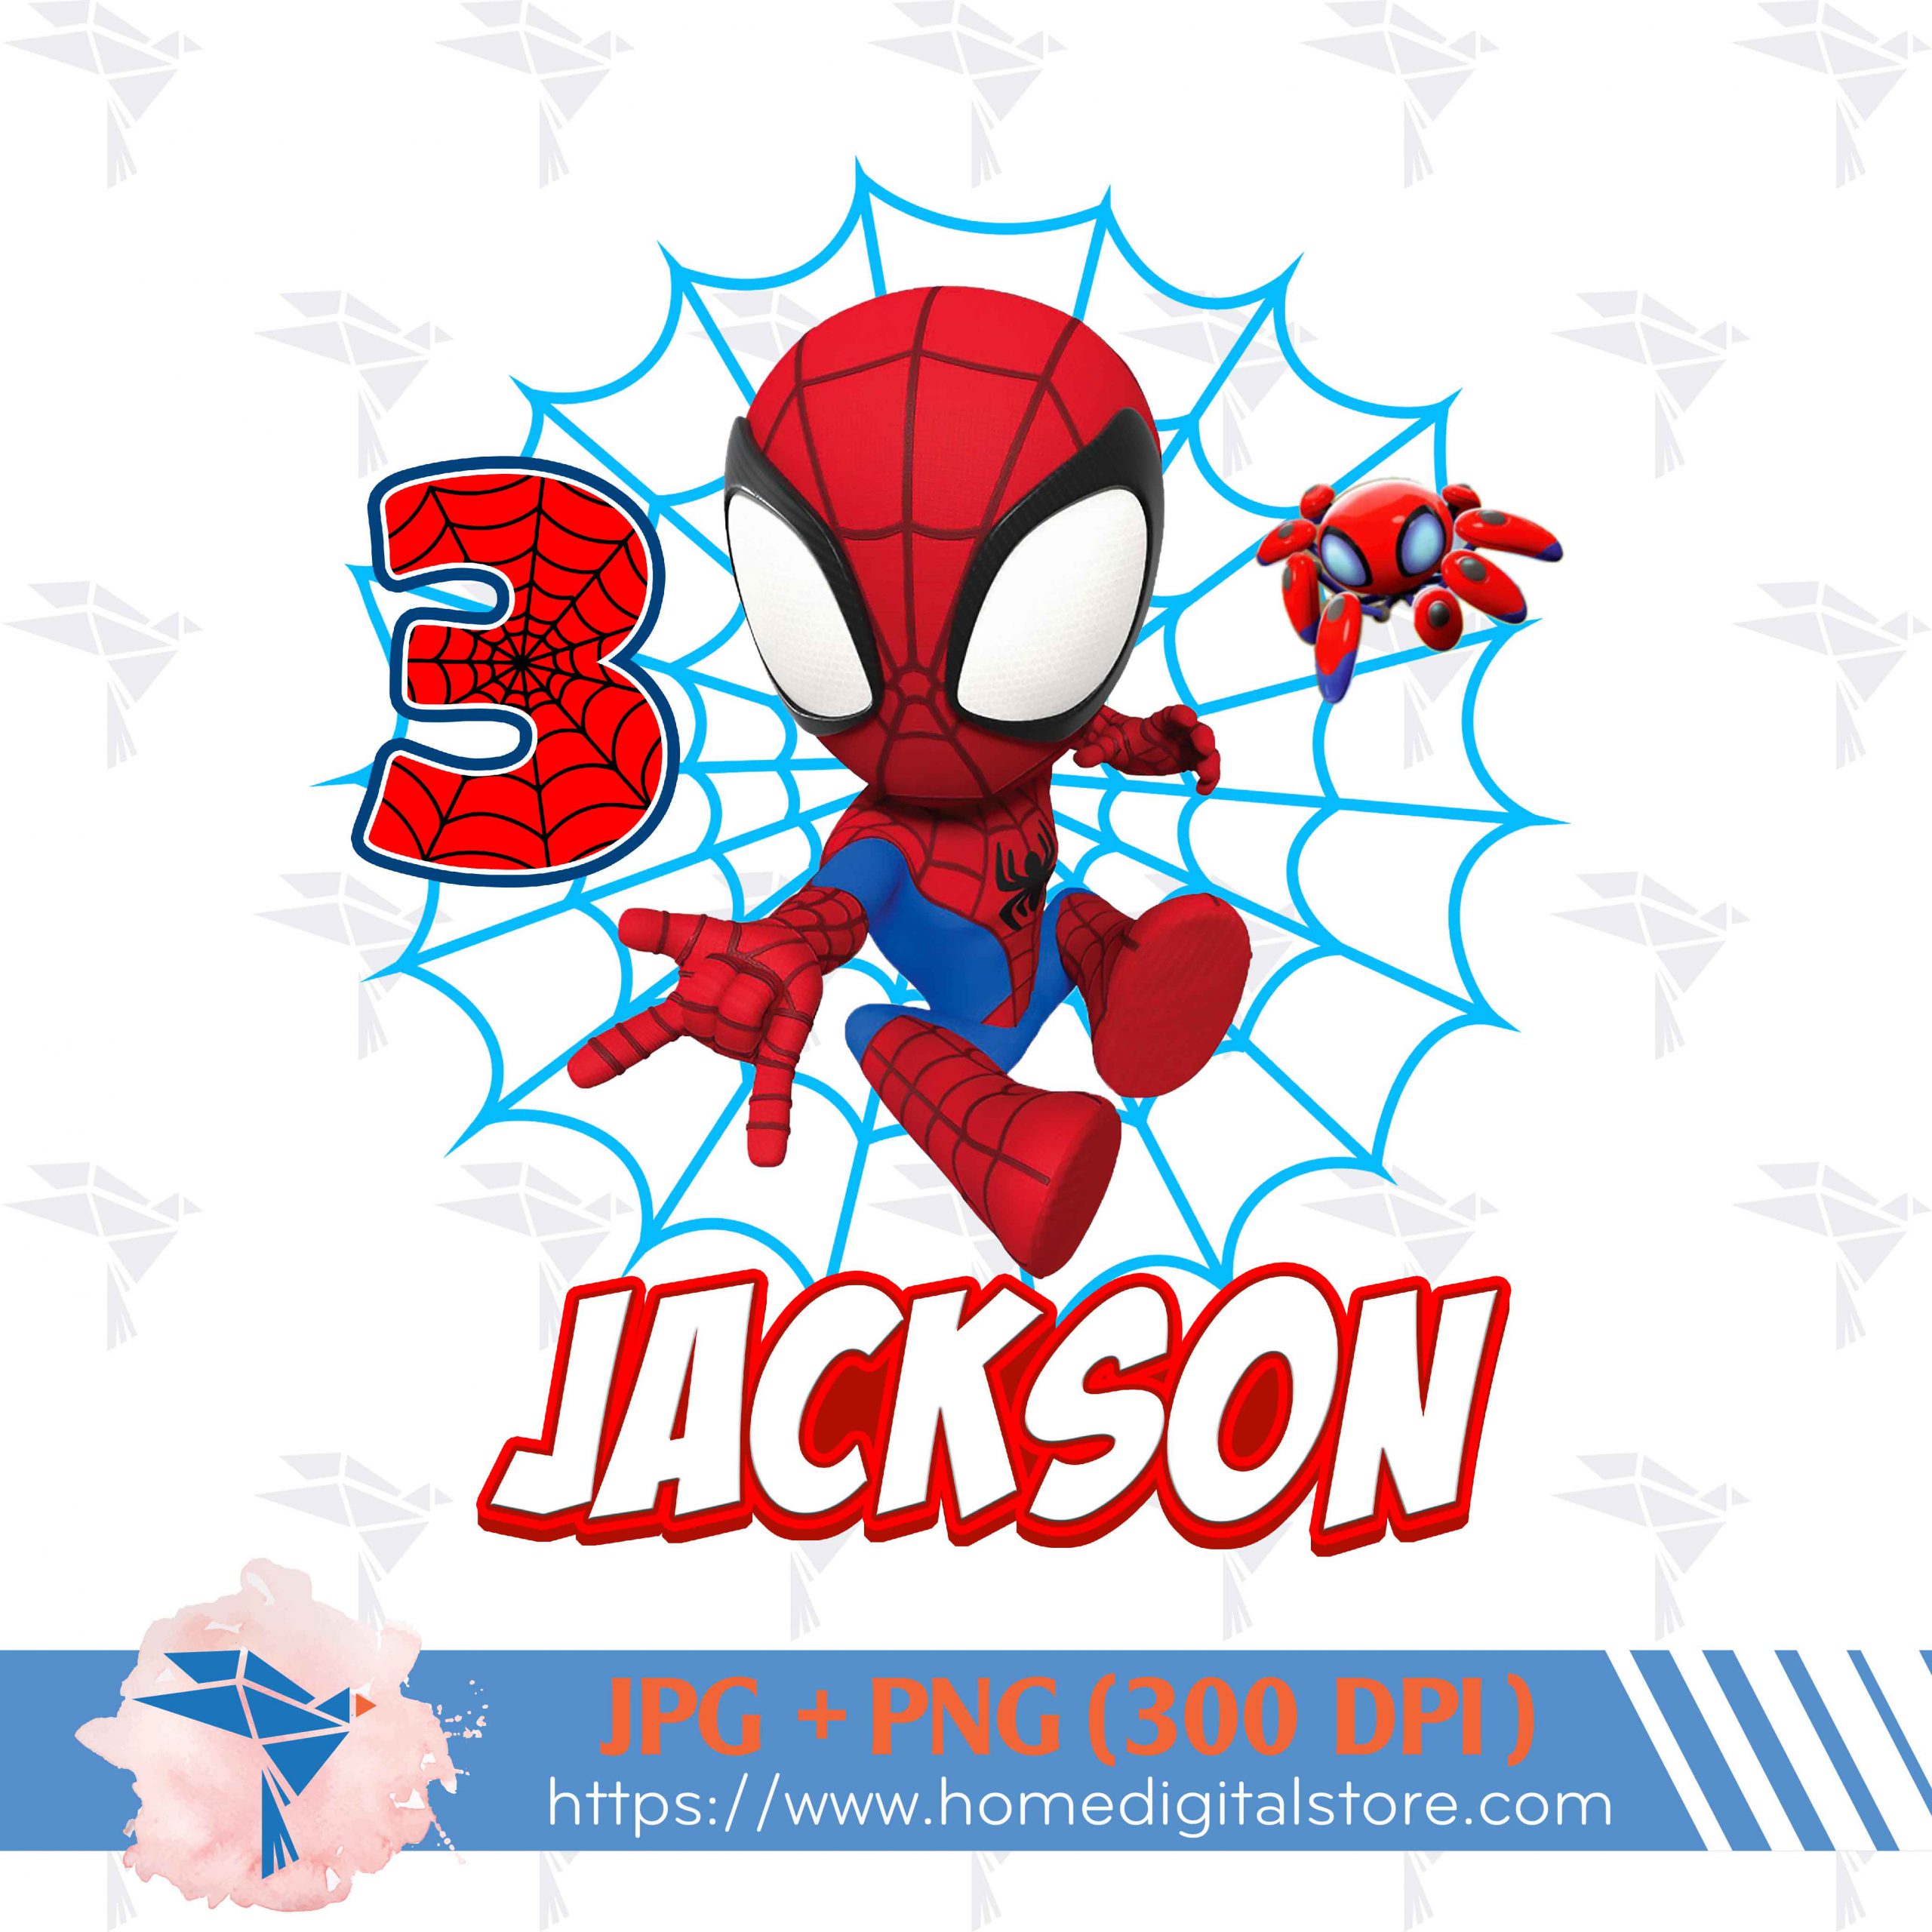 Spidey and His Amazing Friends Birthday PNG, JPG. Instant download files  for Design, Photography, Printing, or more